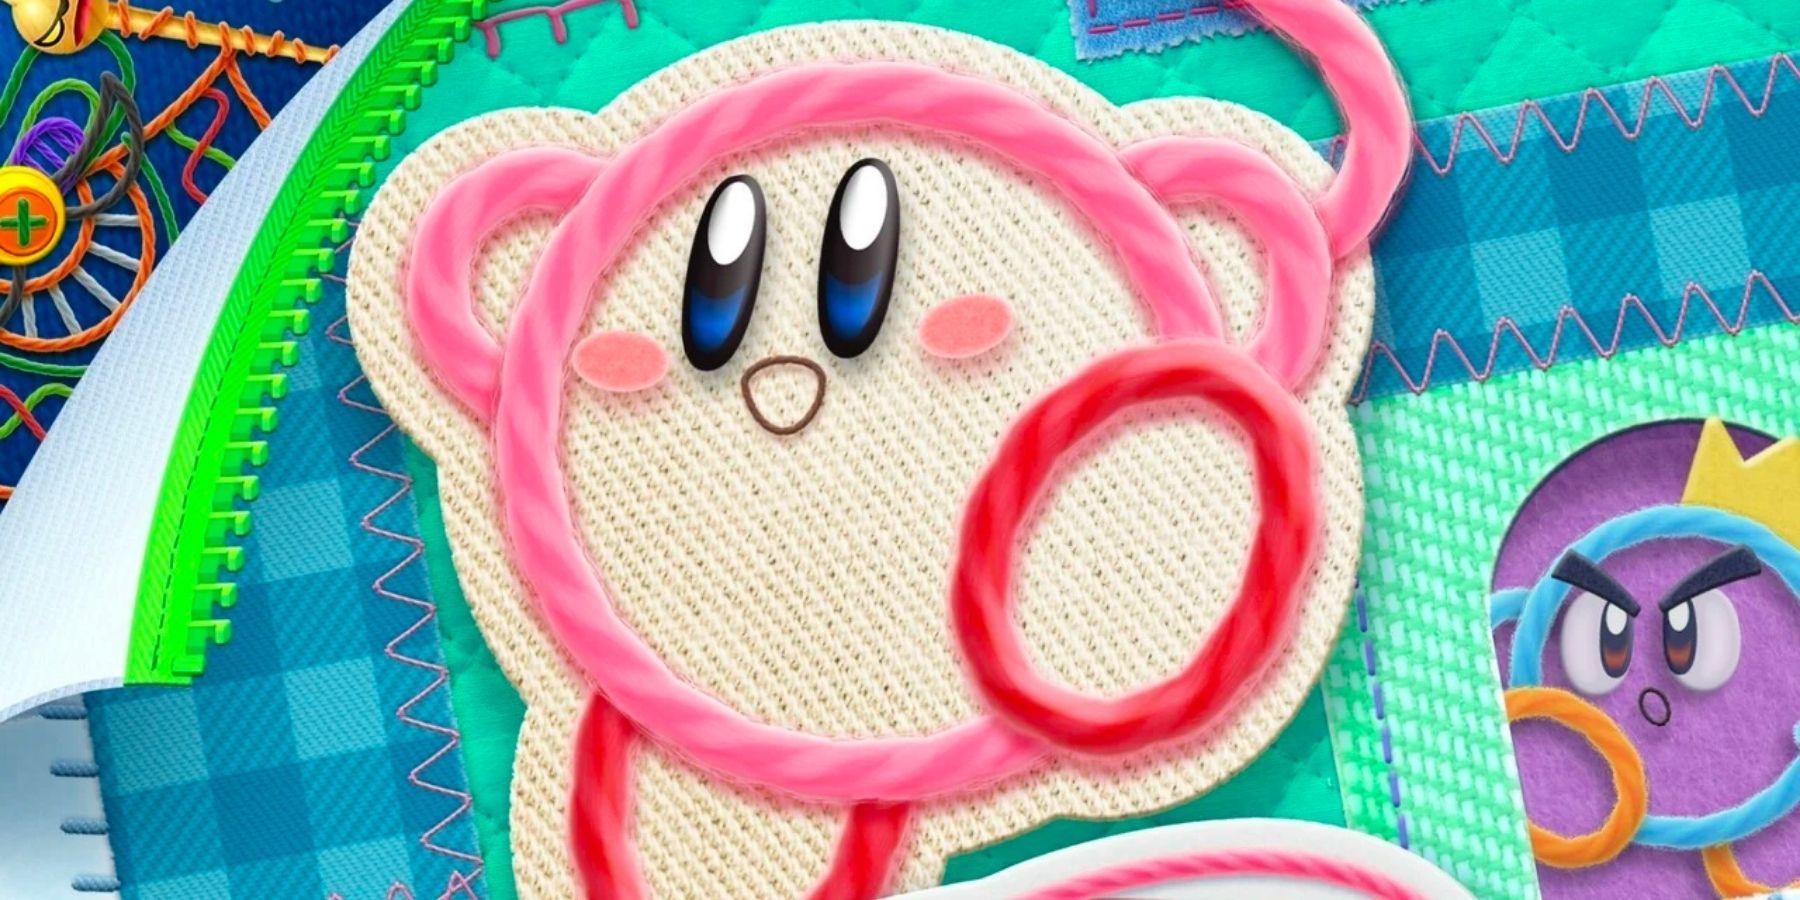 Kirby's Epic Yarn art with Kirby and other blue Kirby